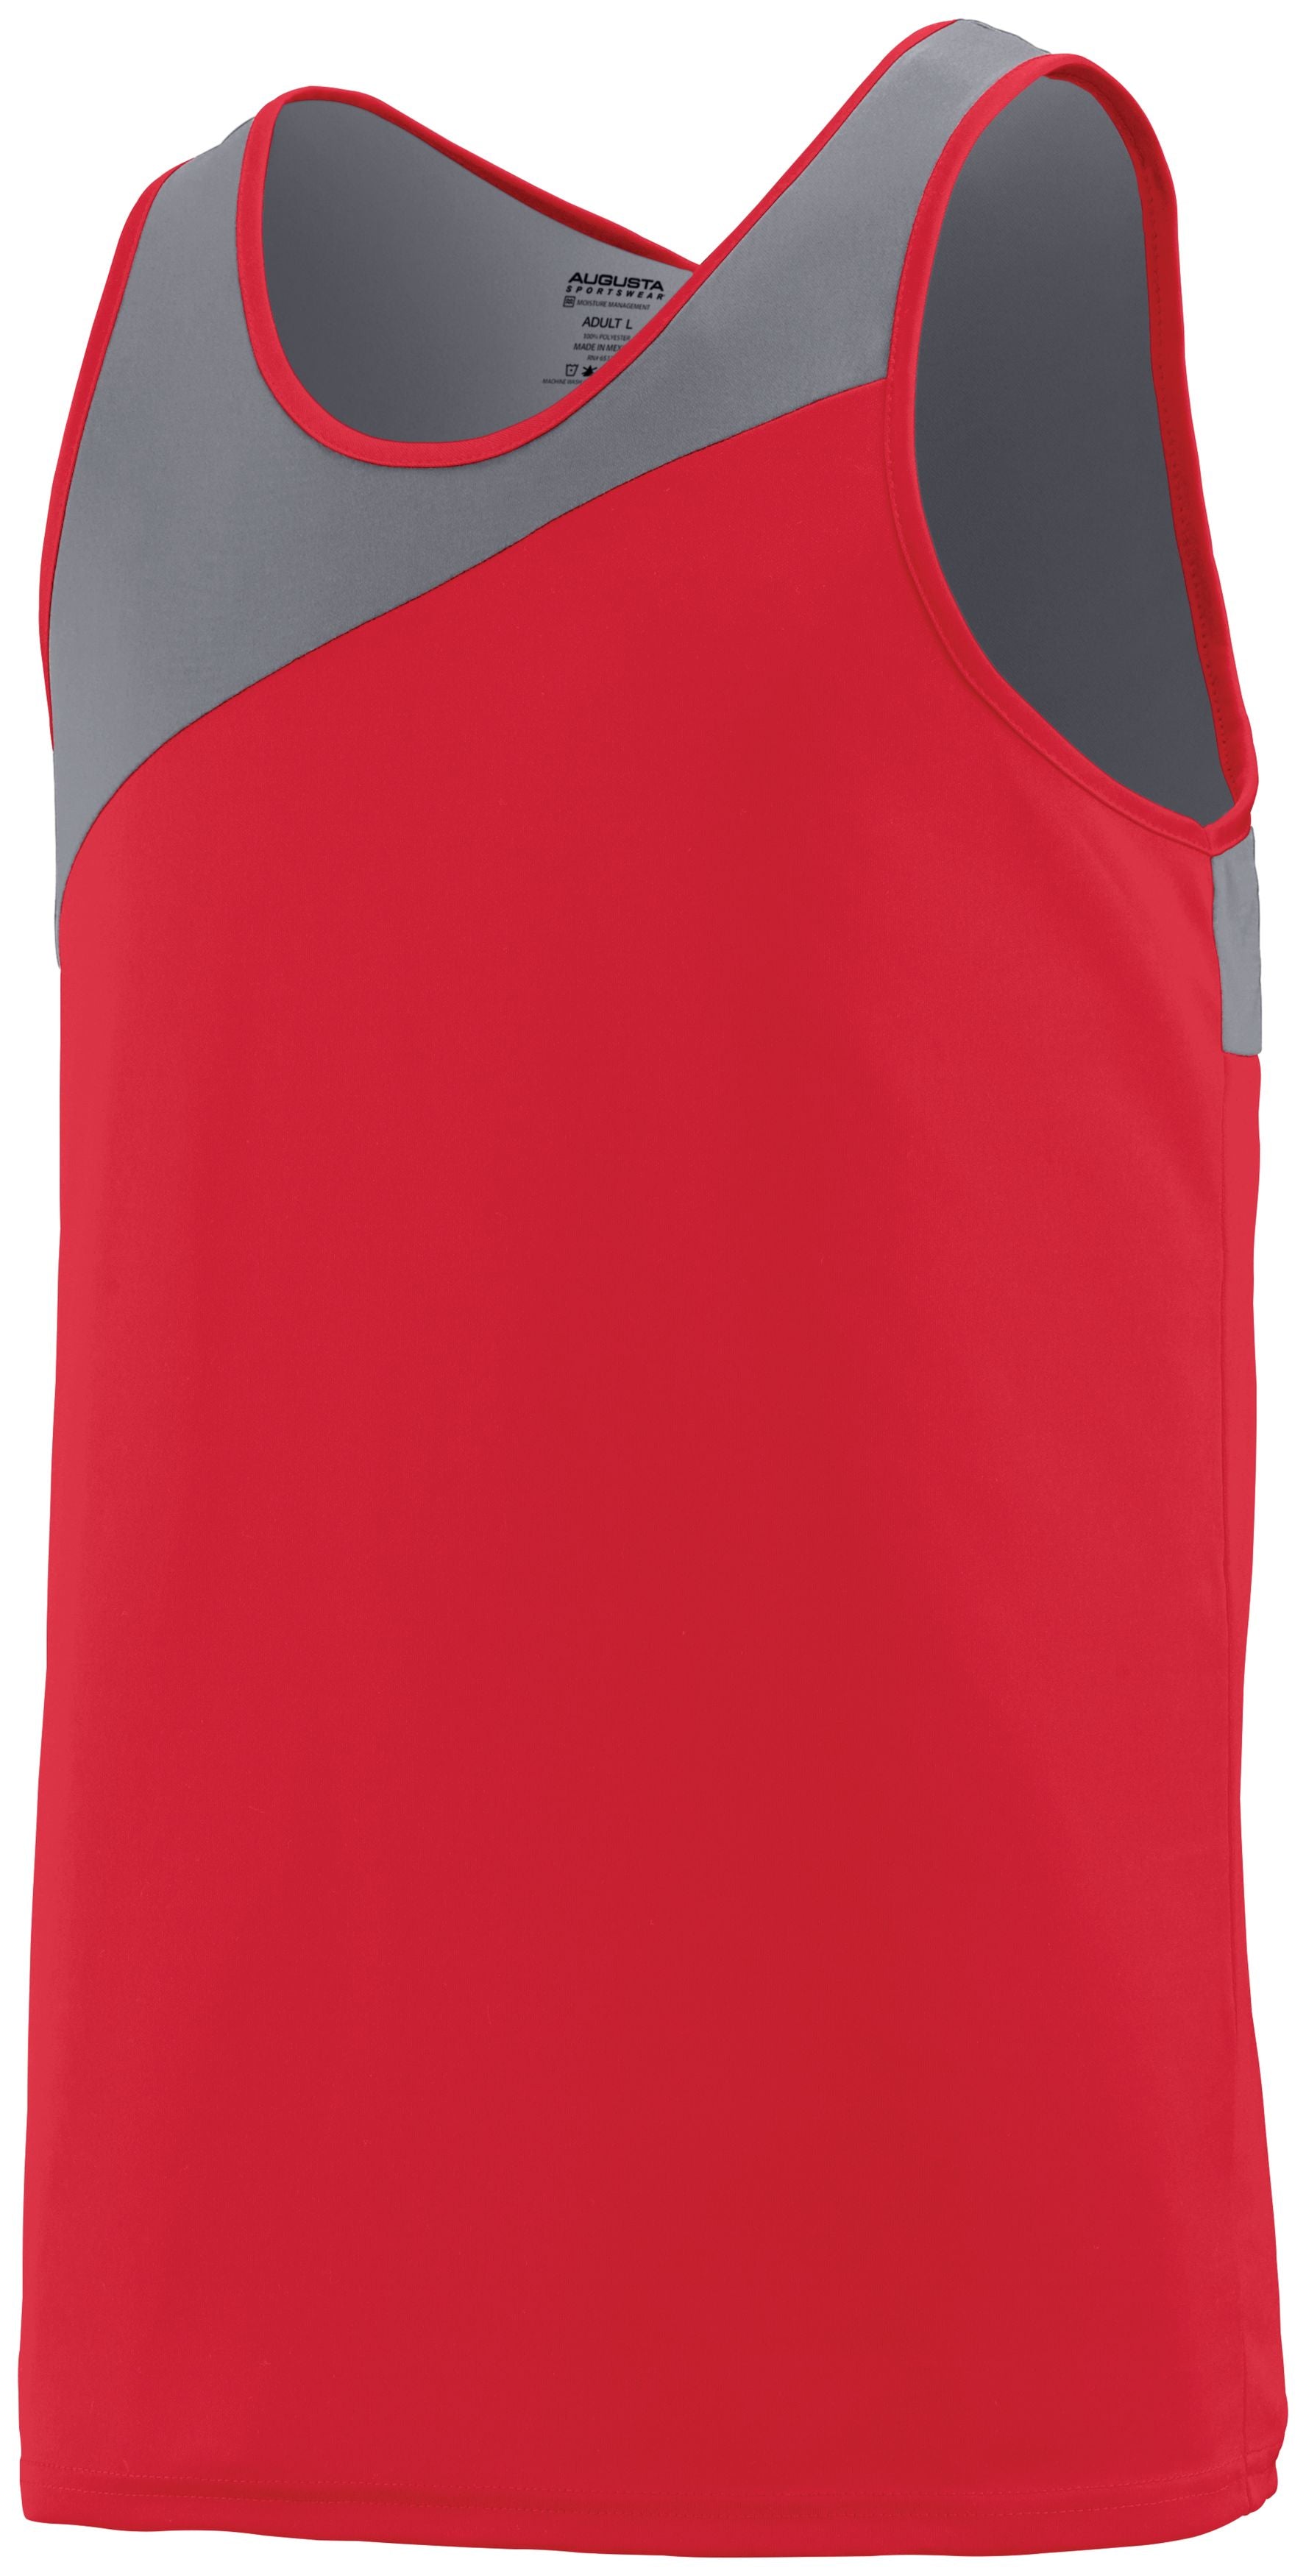 Augusta Sportswear Accelerate Jersey in Red/Graphite  -Part of the Adult, Adult-Jersey, Augusta-Products, Track-Field, Shirts product lines at KanaleyCreations.com